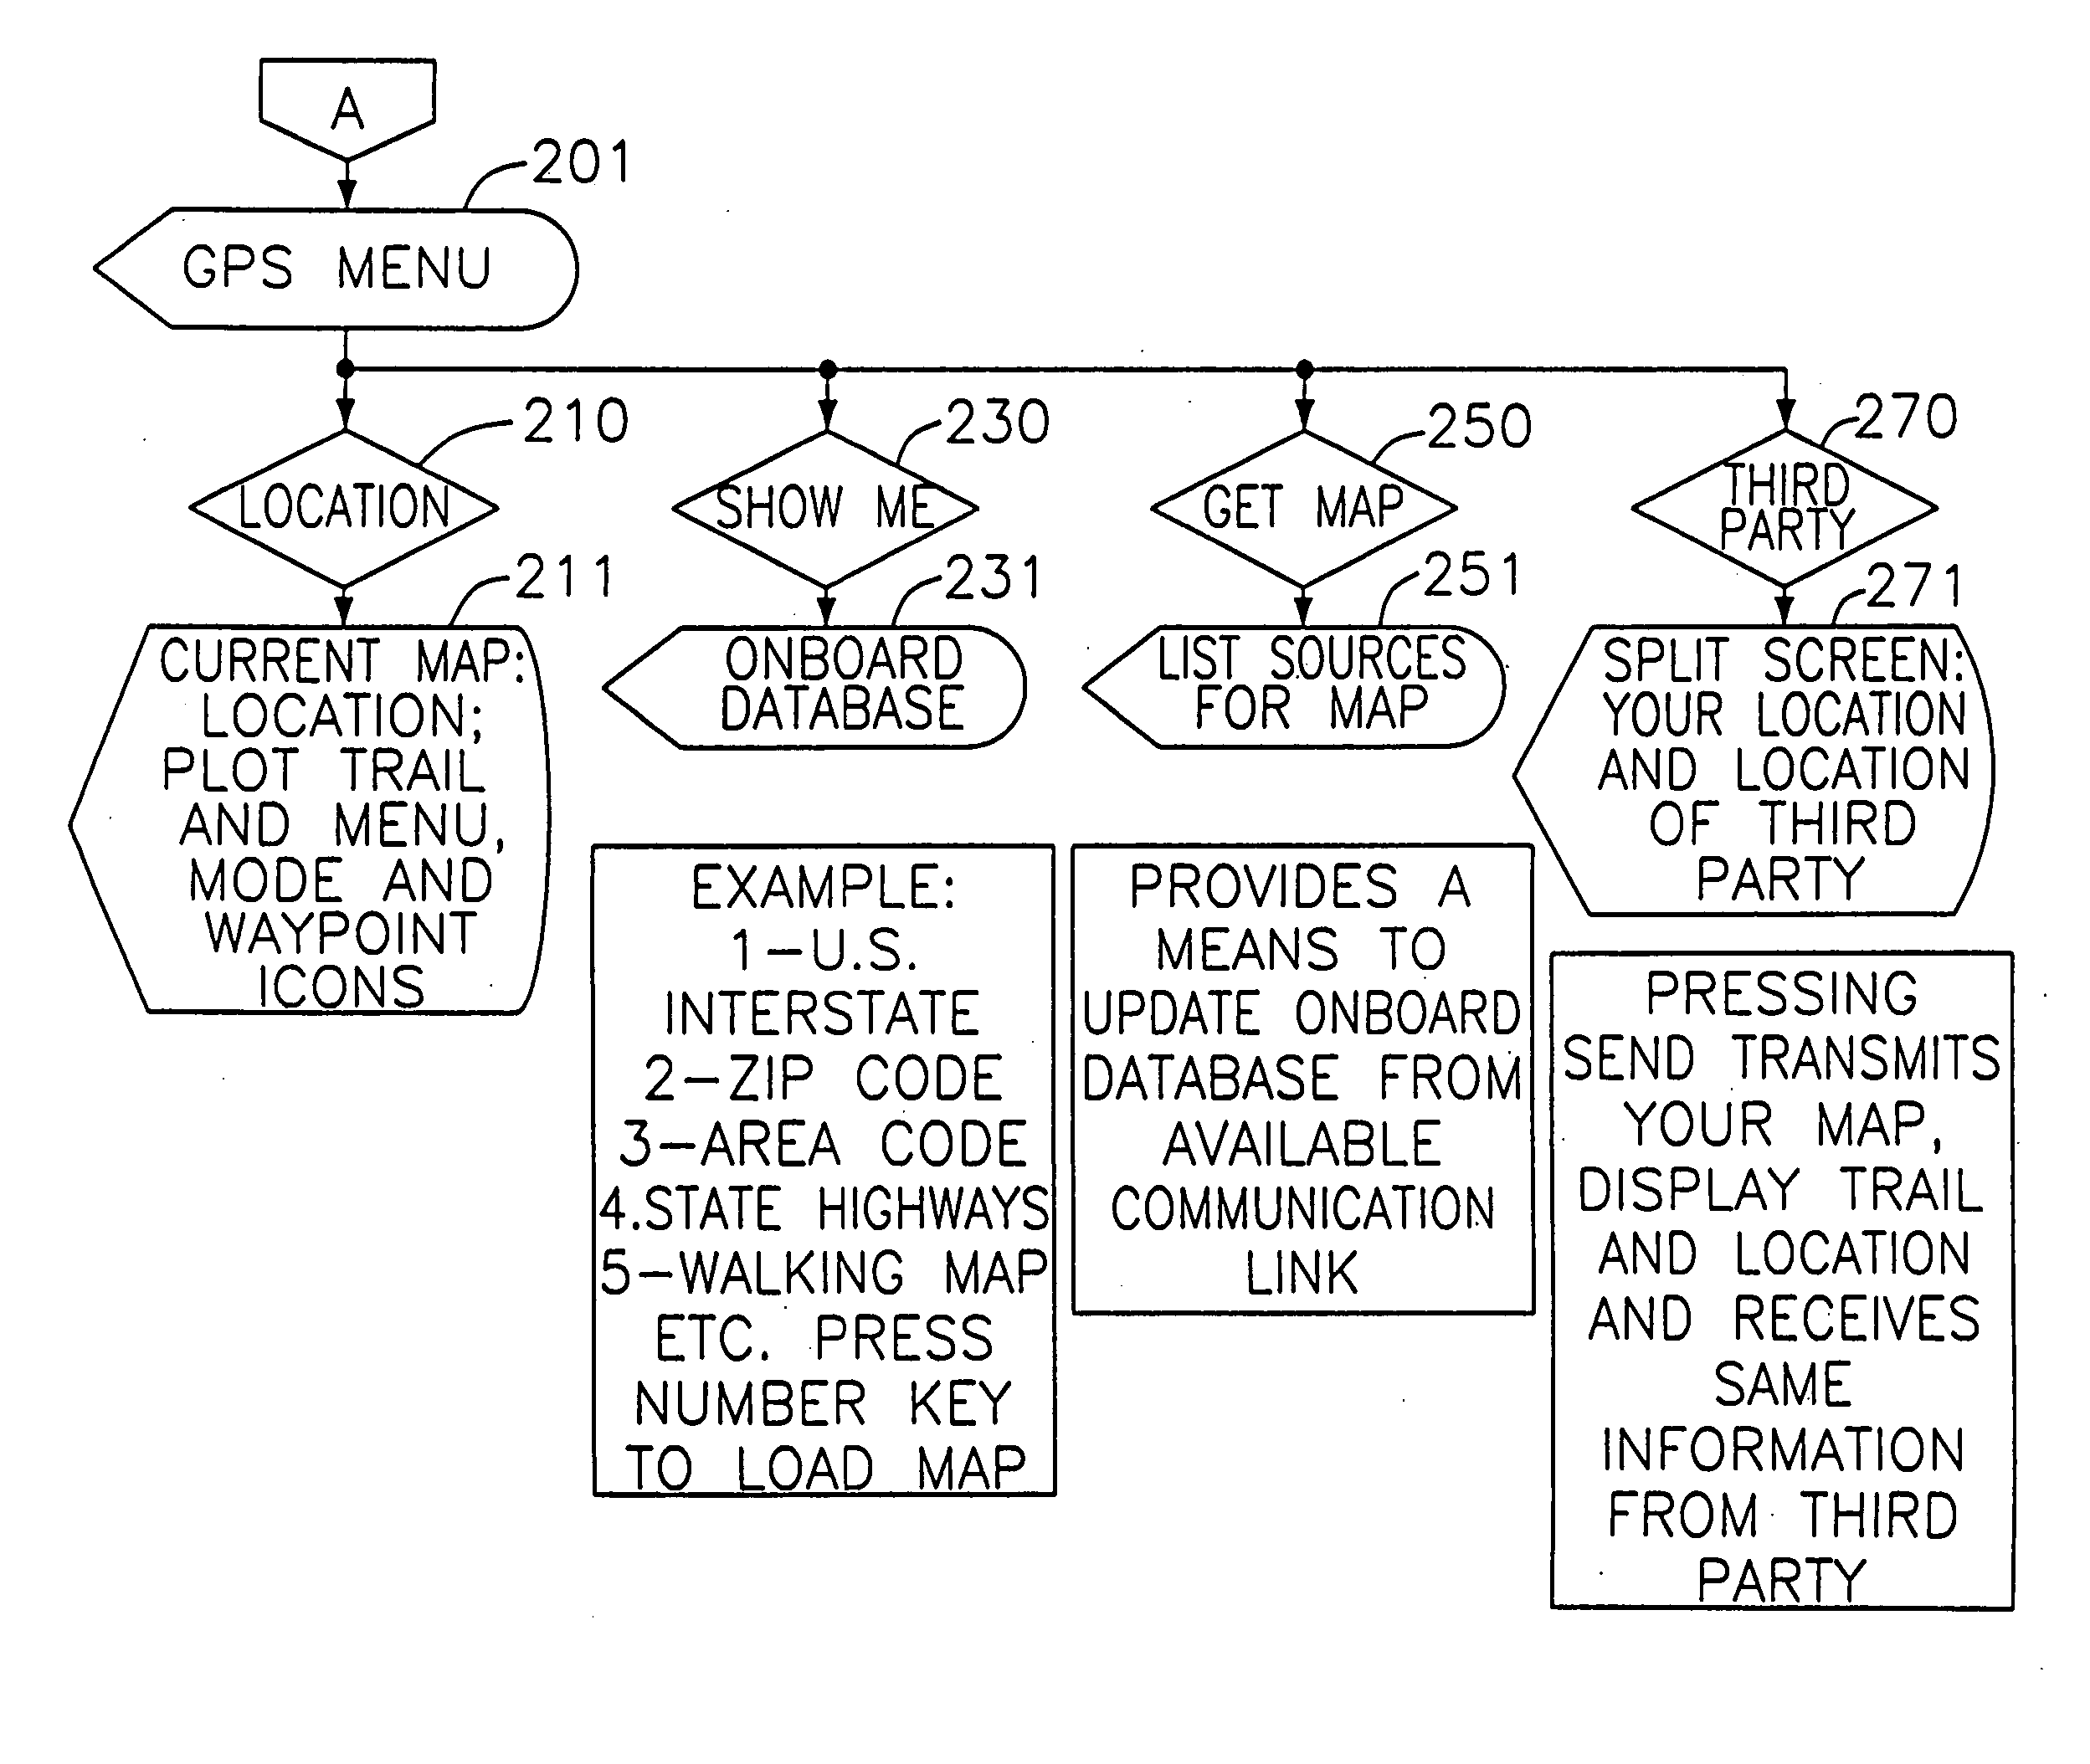 Personal communication system for communicating voice data positioning information